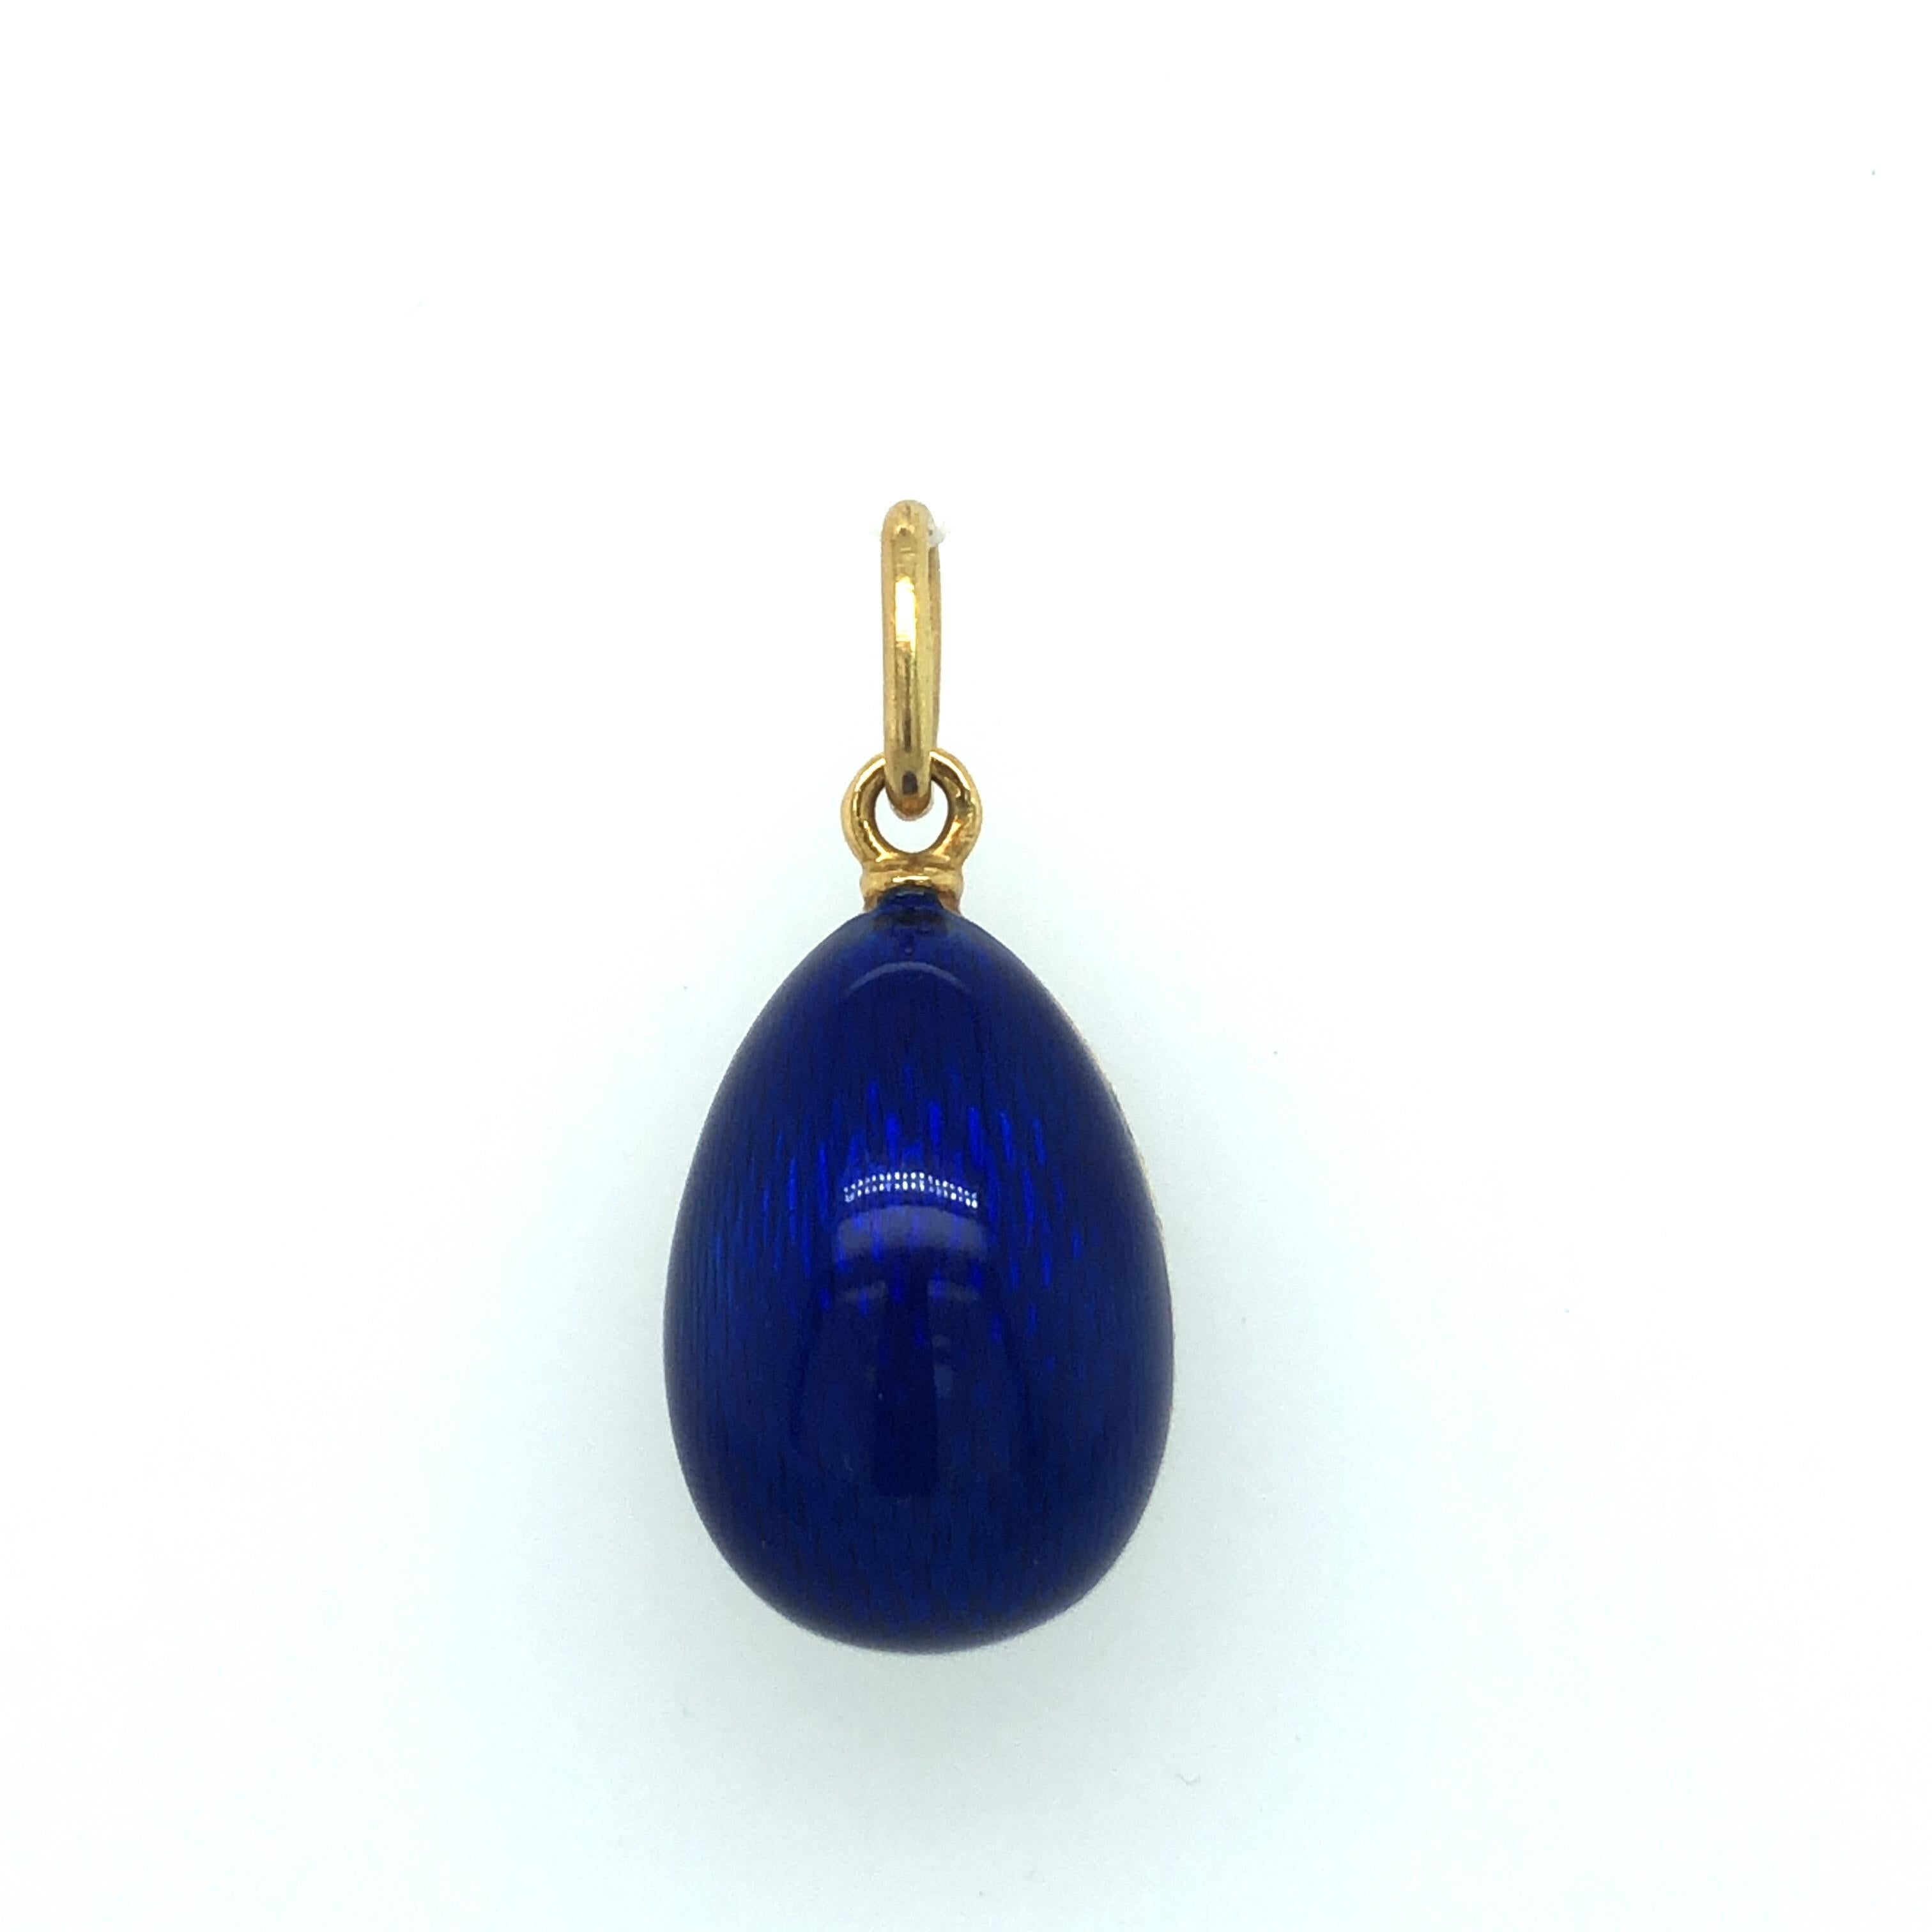 Delightful 18 karat yellow gold, diamond and guilloché blue enamel modern Fabergé egg charm/pendant.
The pendant is crafted in 18 karat yellow gold and covered by shimmering guilloché blue enamel. The front side features 3 flame-shaped yellow gold